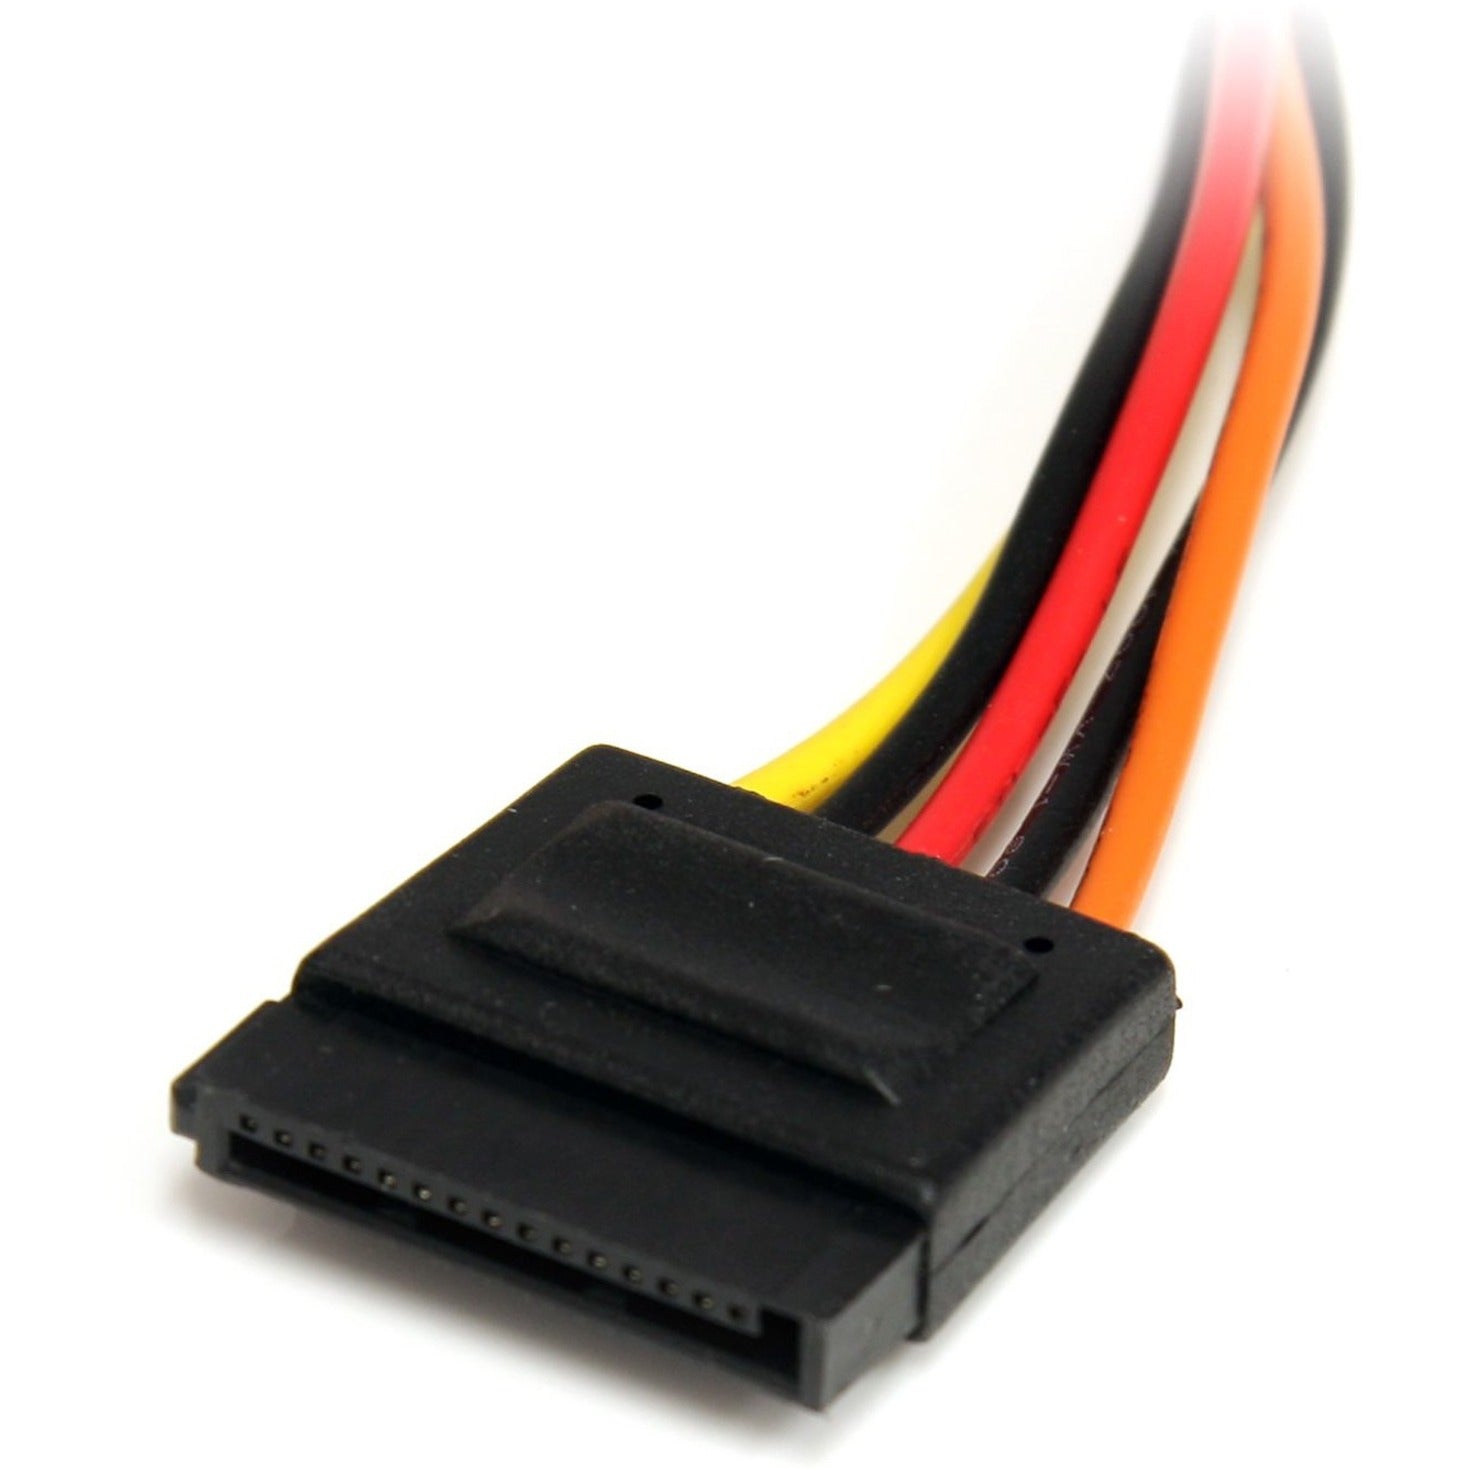 StarTech.com SATAPOWEXT12 12in 15 Pin SATA Power Extension Cable, Extend Your SATA Power Connection with Ease